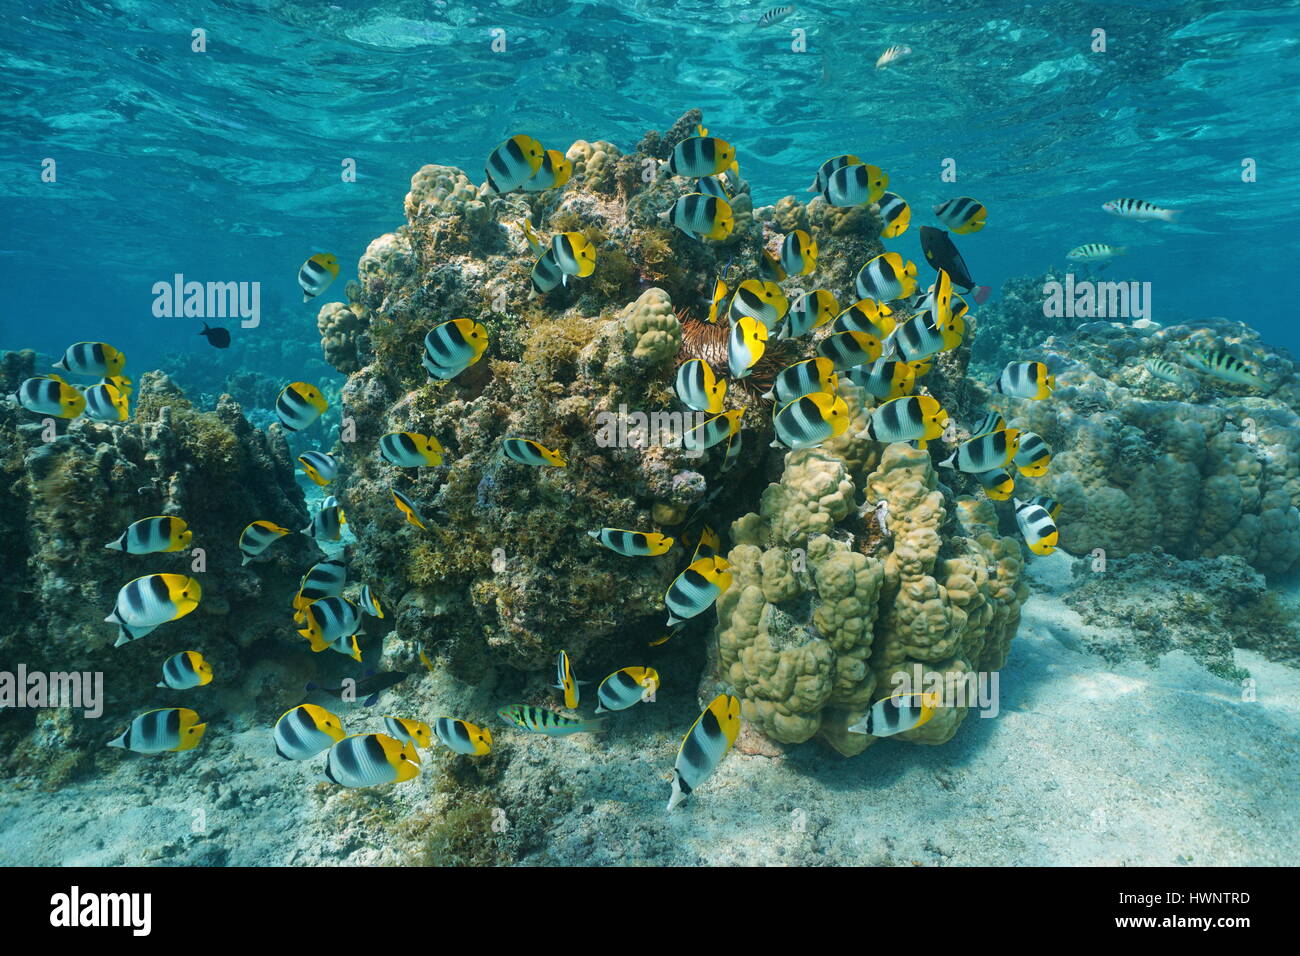 School of colorful tropical fish Pacific double-saddle butterflyfish on a shallow coral reef in the lagoon of Bora Bora, Pacific ocean, French Polynes Stock Photo